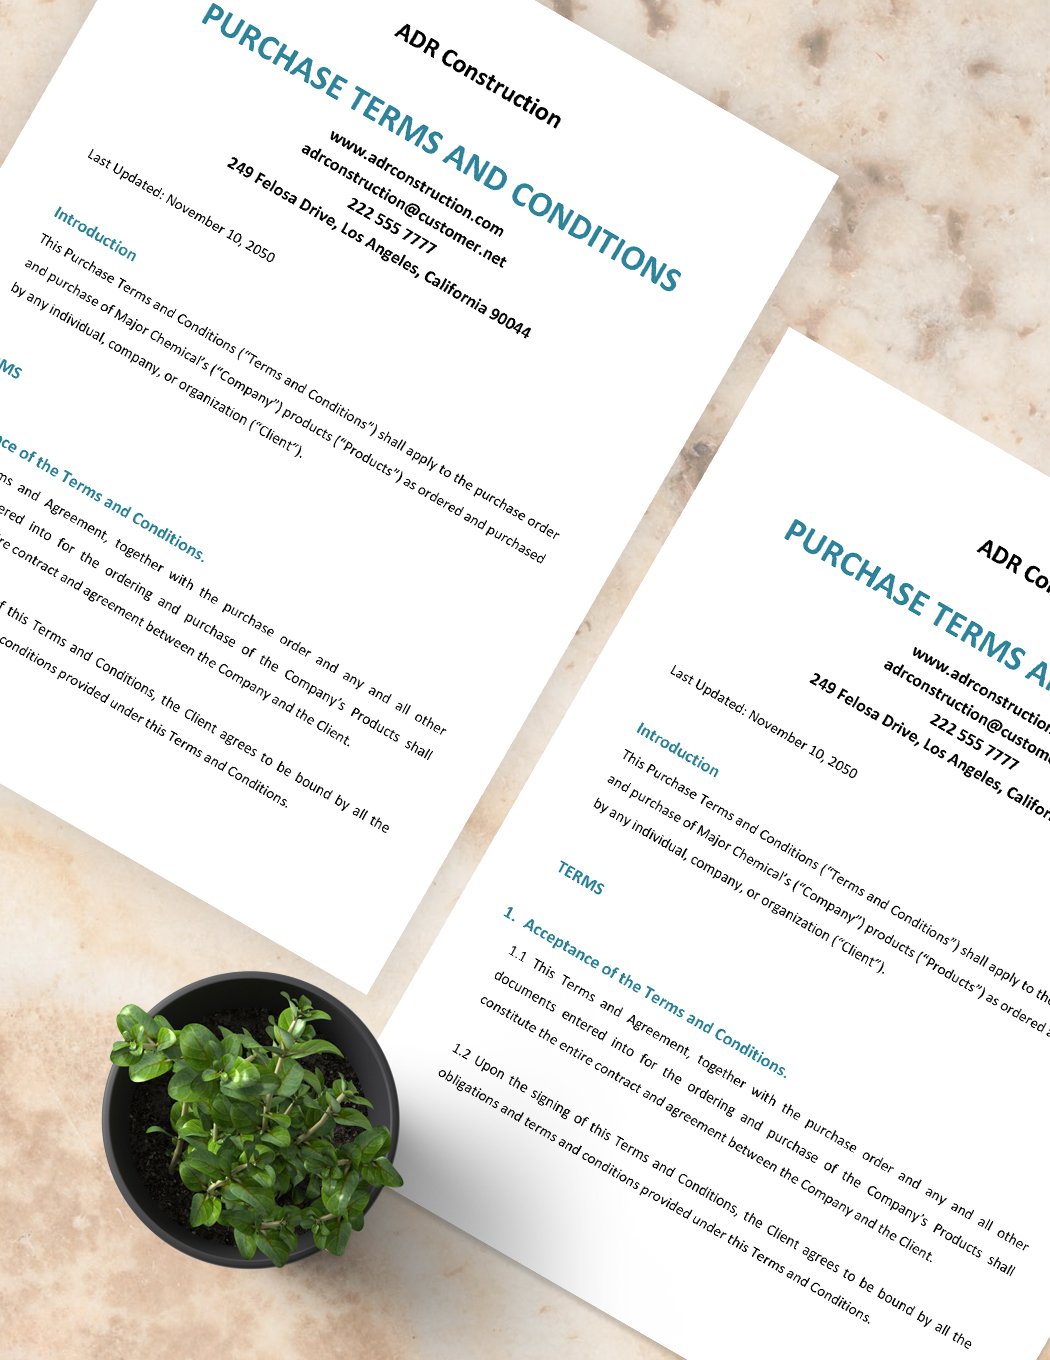 Purchase Terms And Conditions Template